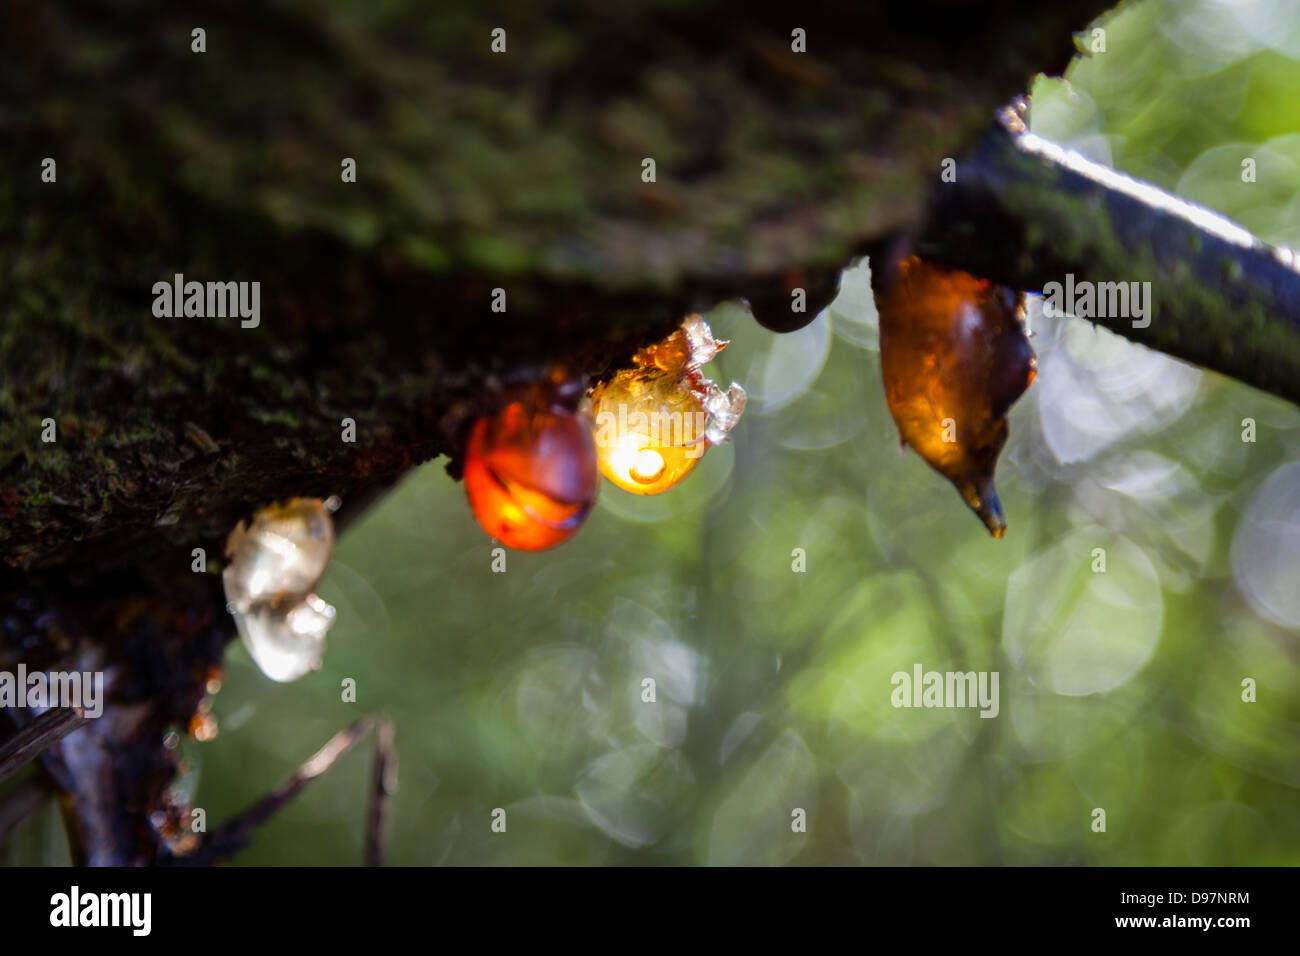 Solid Amber Resin Drops on a Cherry Tree Trunk. Stock Image - Image of  outflow, material: 33030893